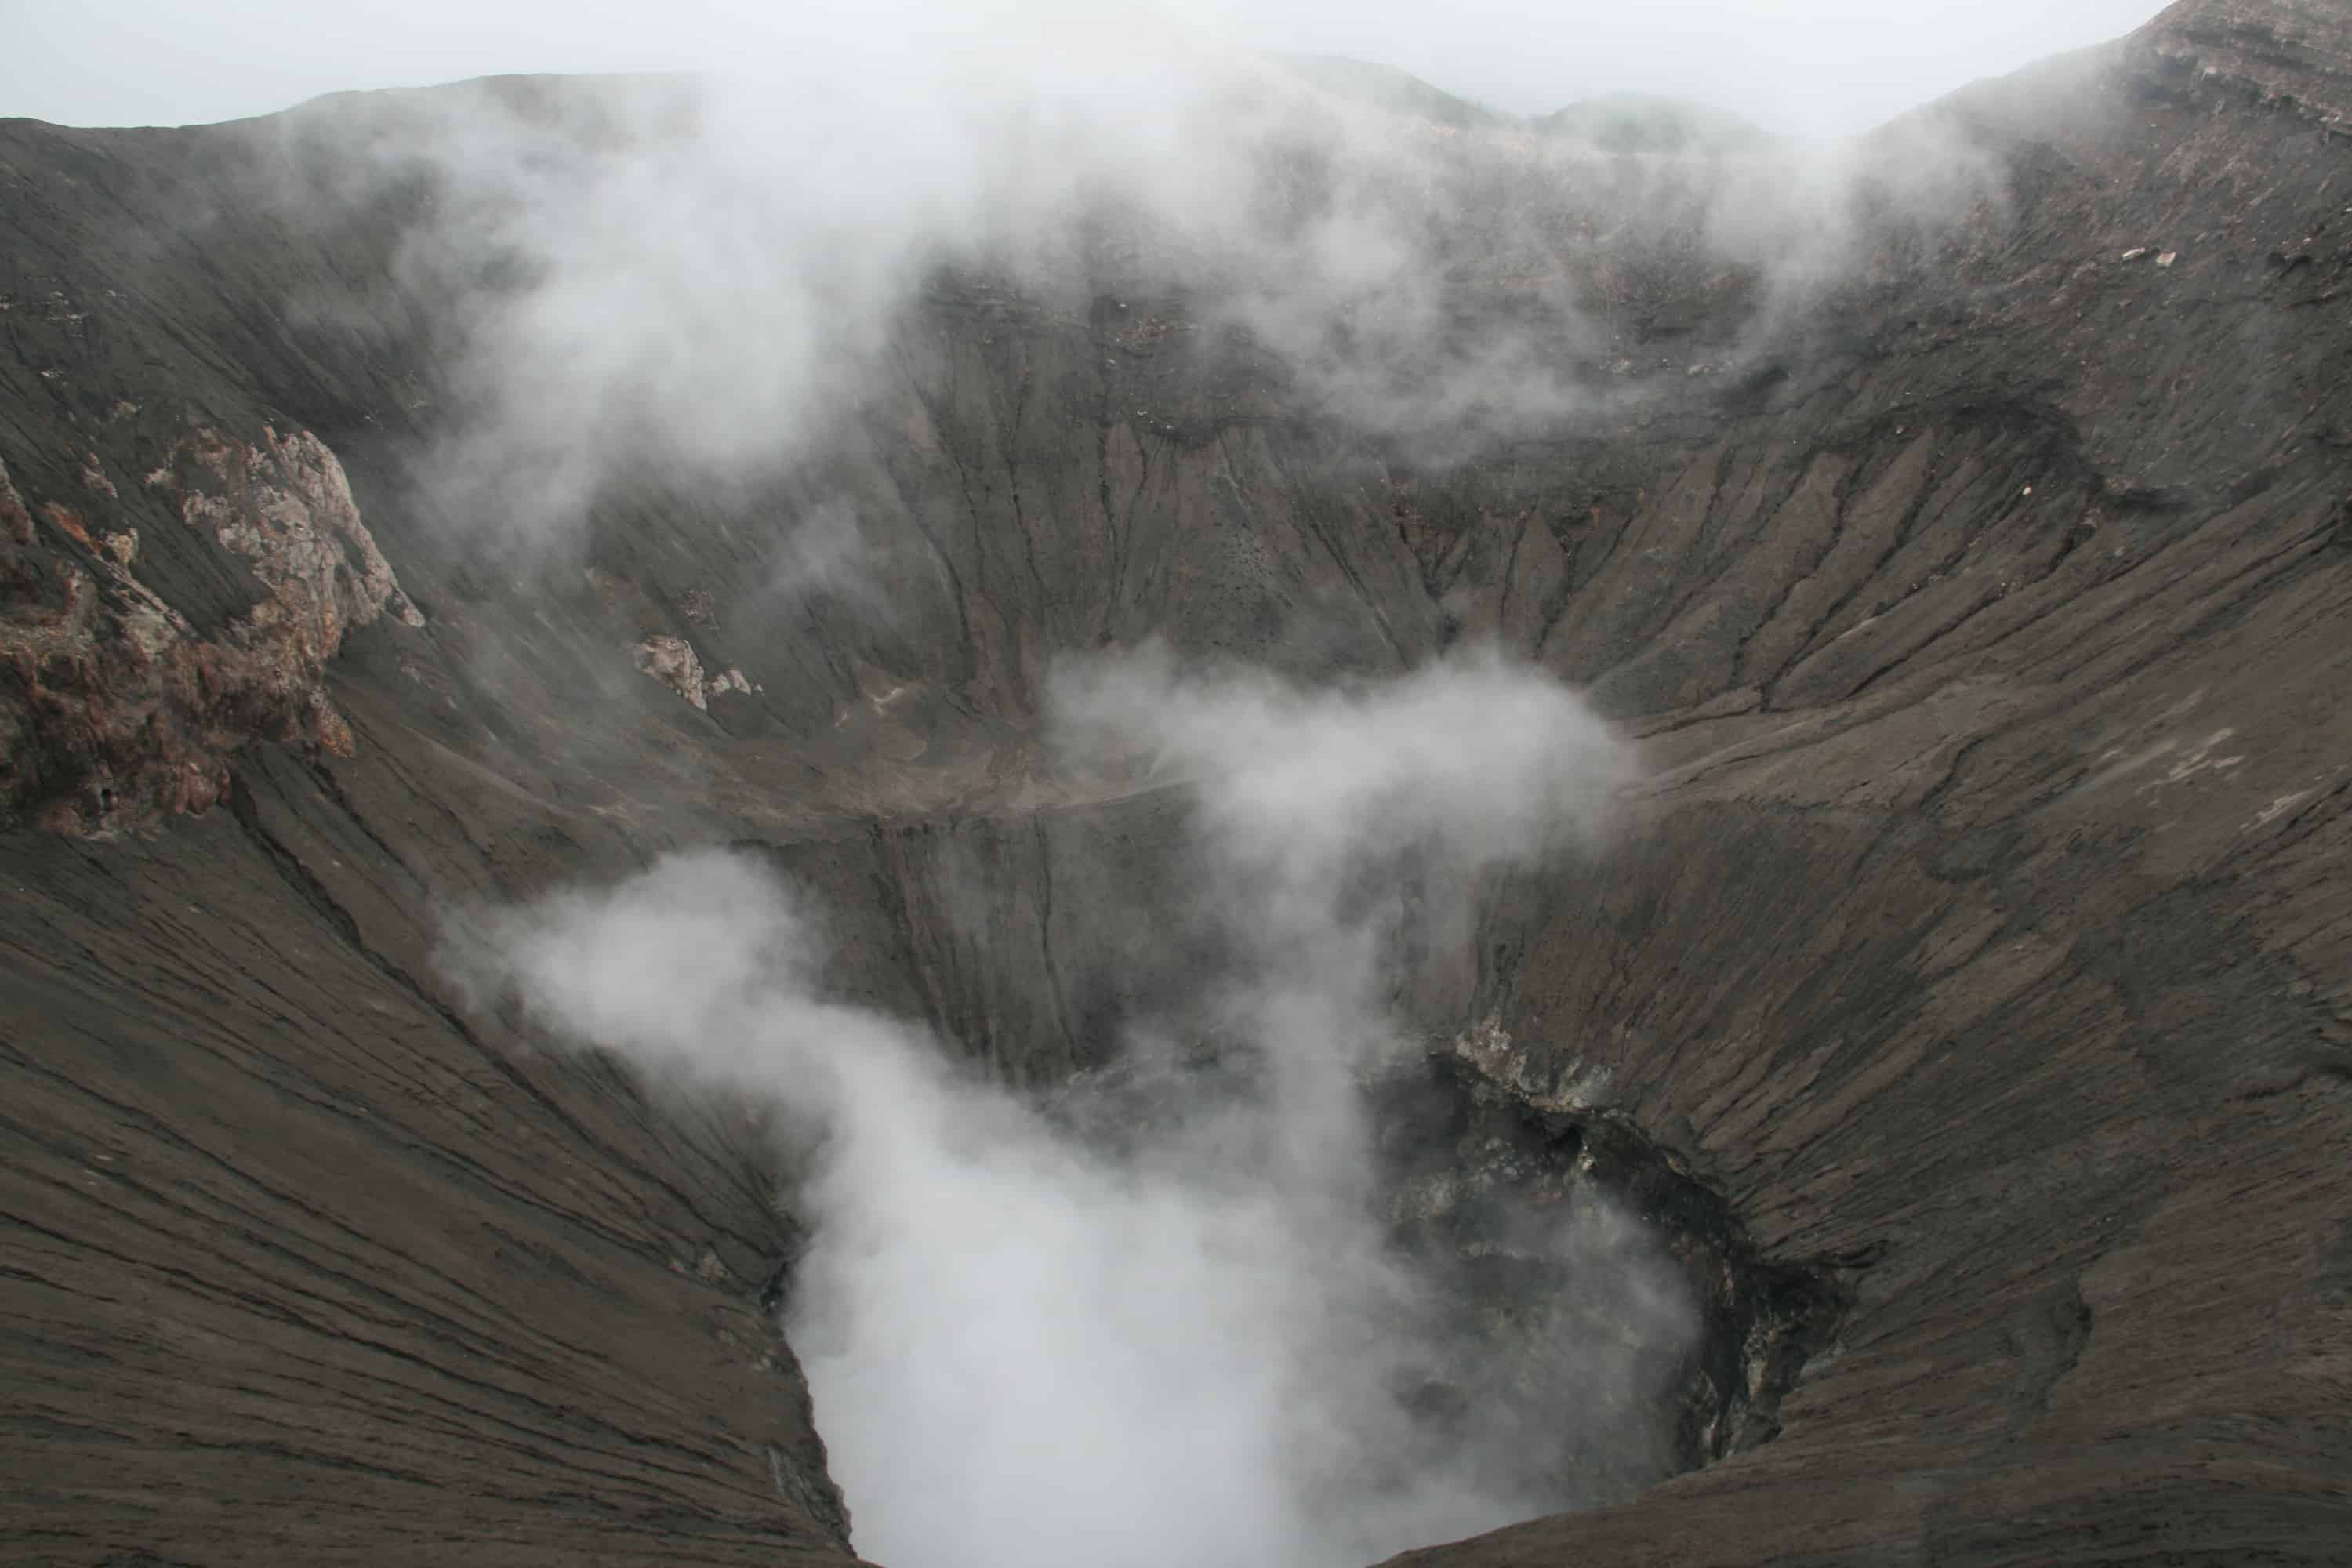 Looking down onto the Bromo's volcano crater in Indonesia